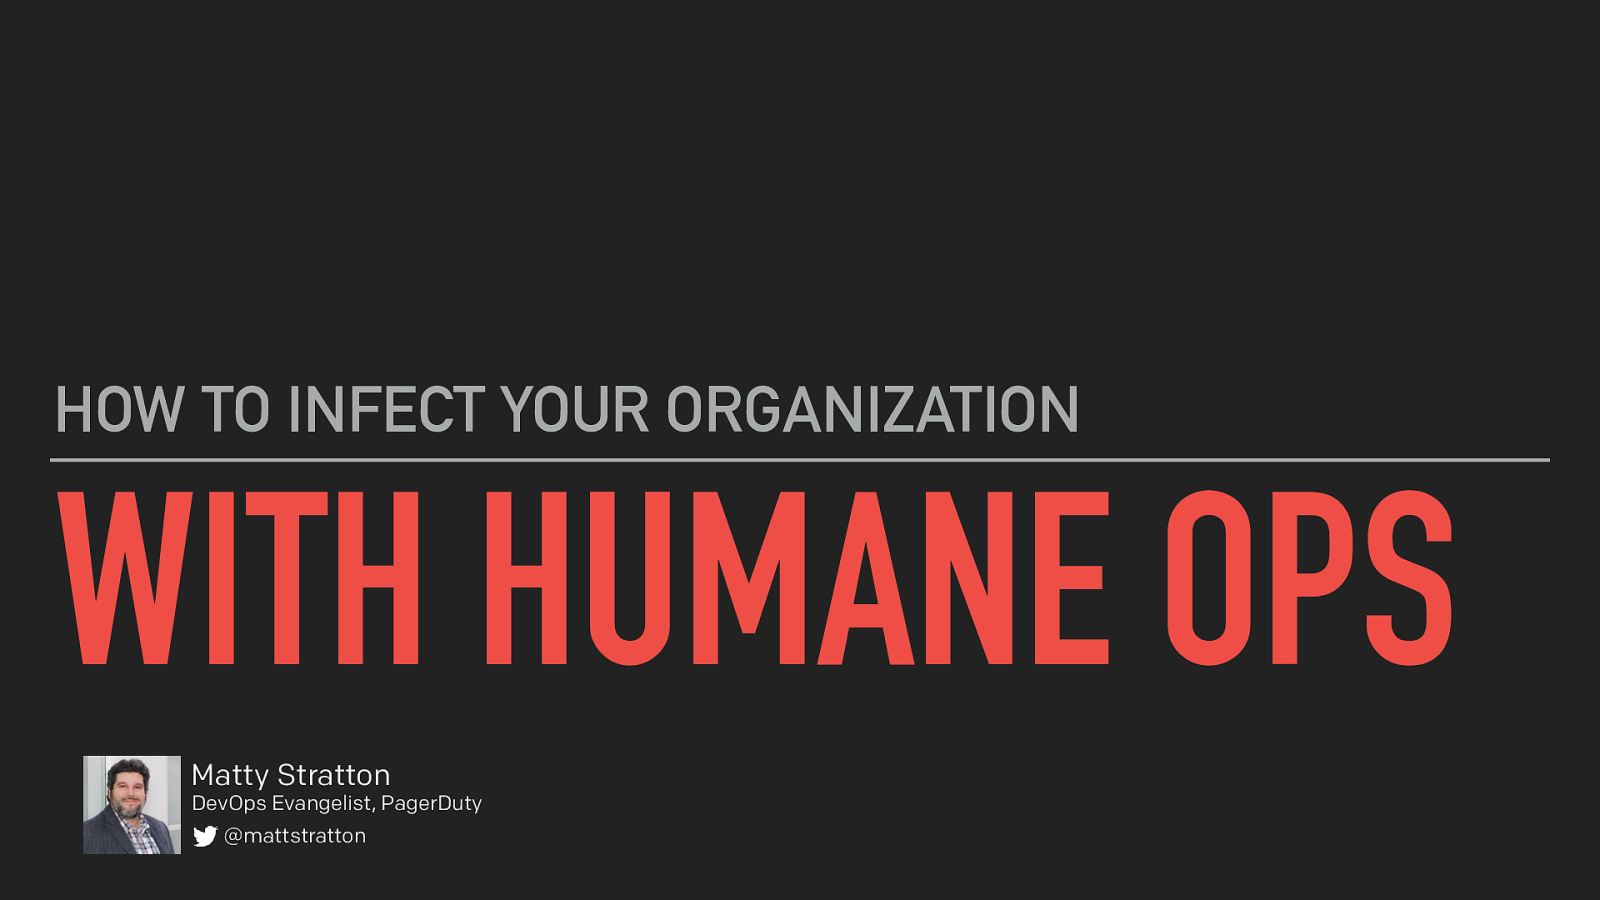 How Do You Infect Your Organization With Humane Ops?